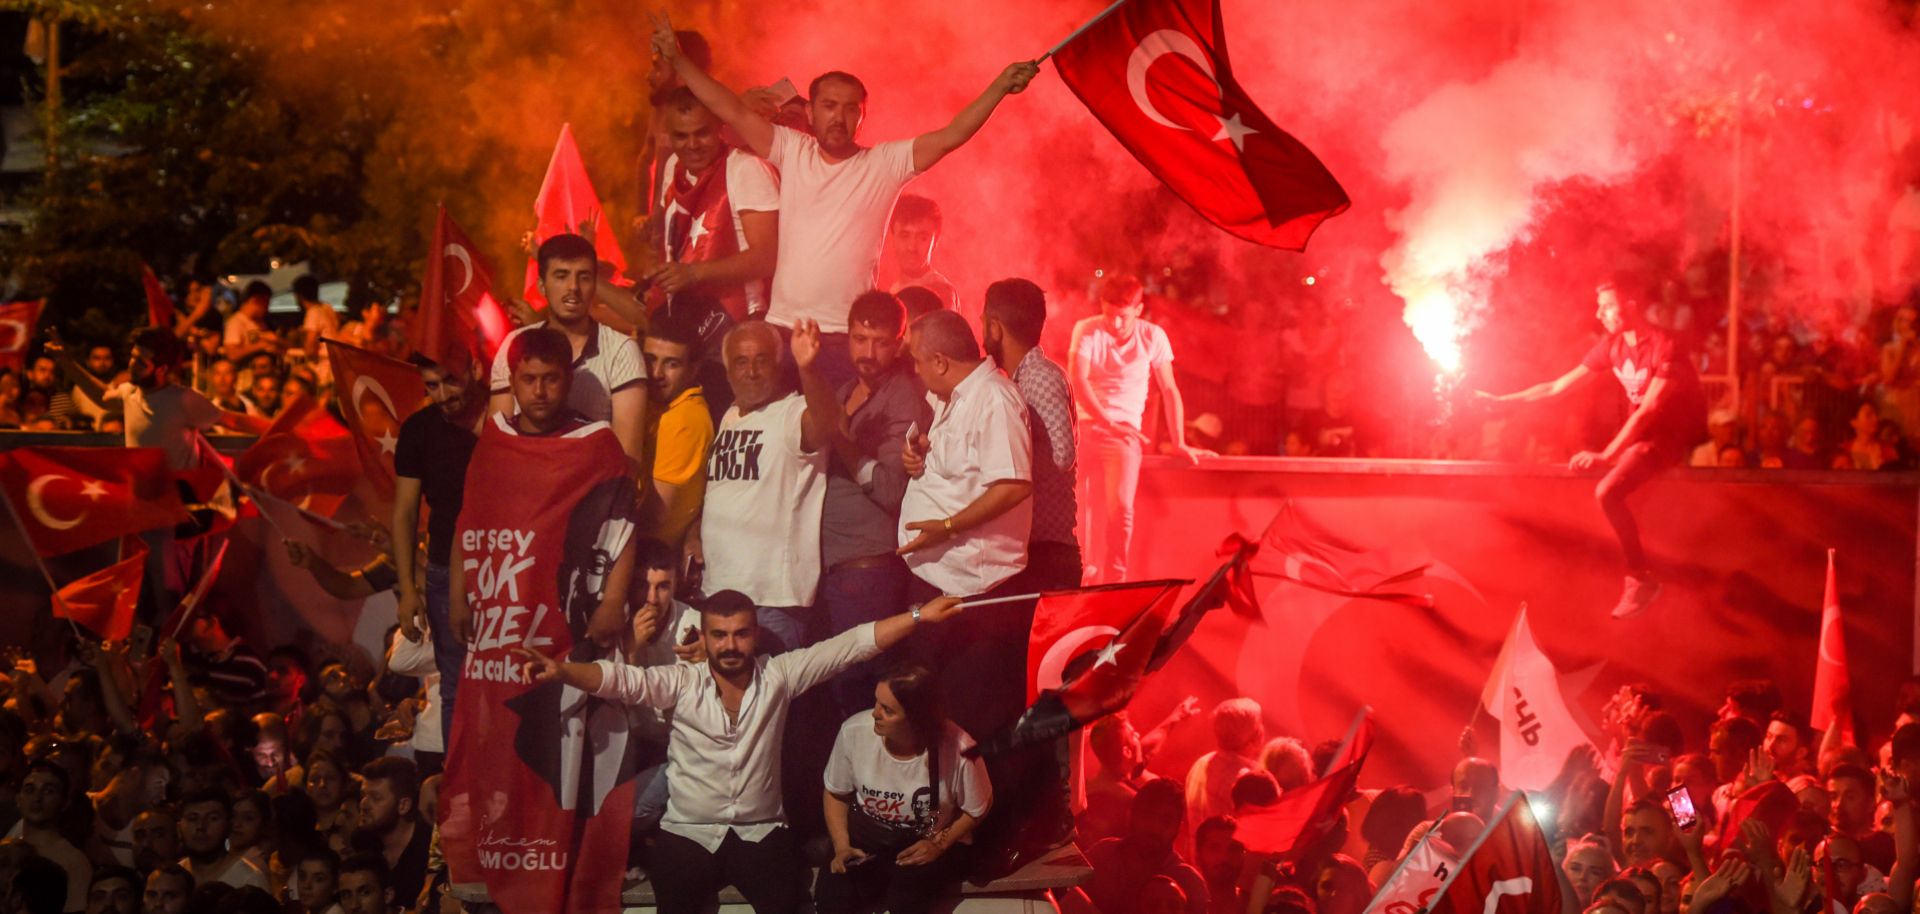 People celebrate the victory of Republican People's Party (CHP) Istanbul mayoral candidate Ekrem Imamoglu over the Justice and Development Party’s (AKP) Binali Yildirim on June 23, 2019. 